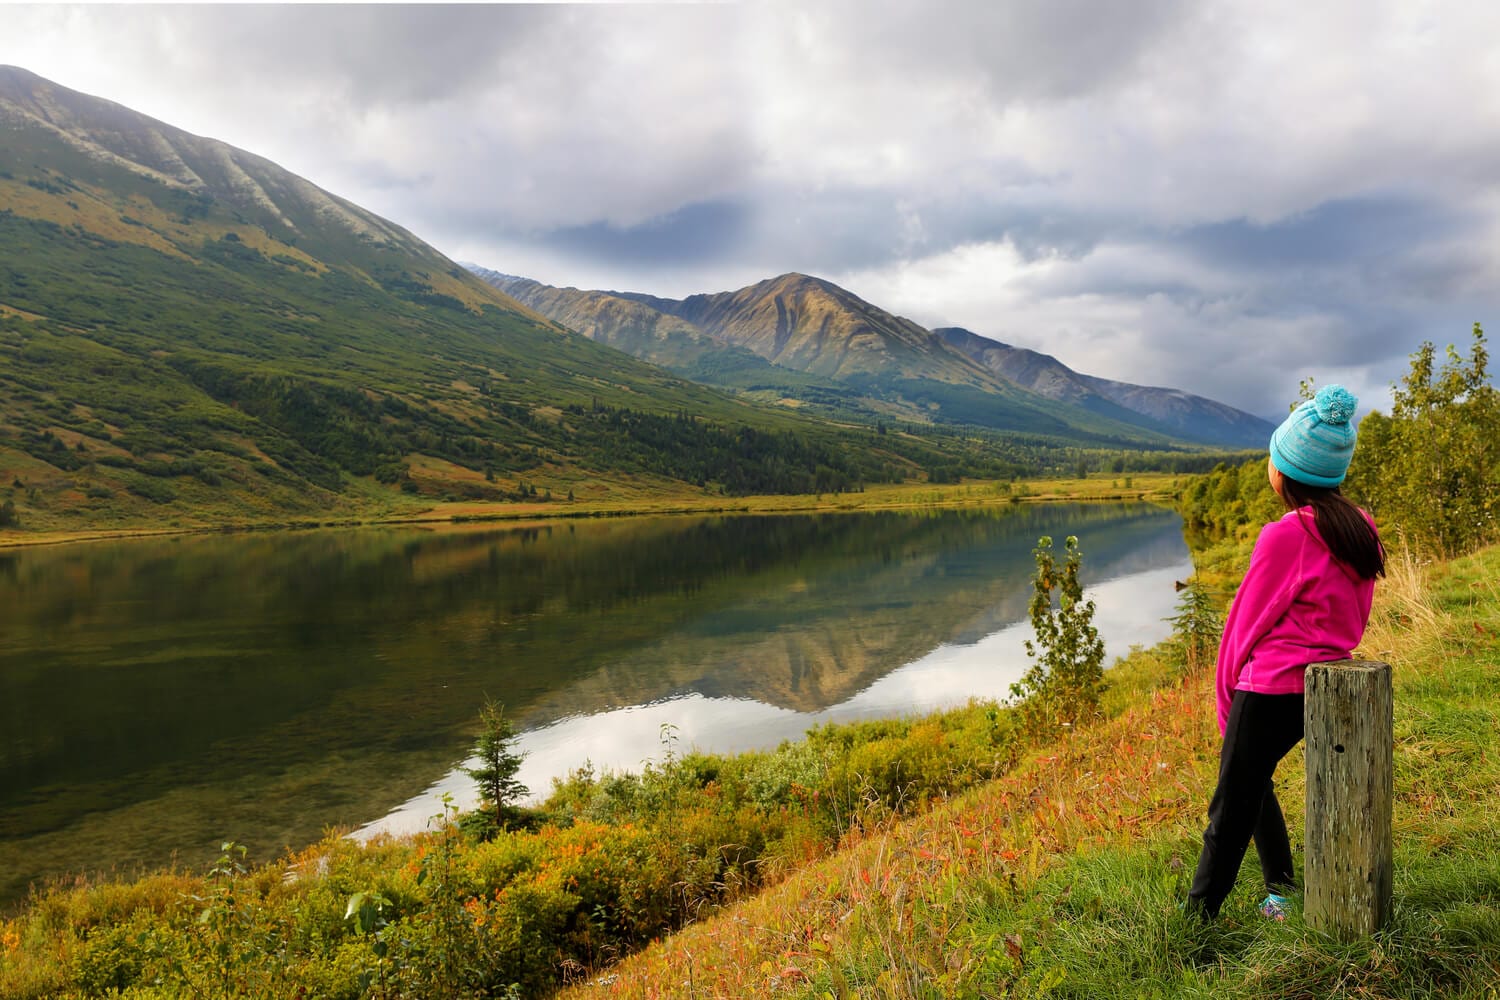 An eager traveler looks on at the Chugach National Forest while enjoying an Alaskan adventure.